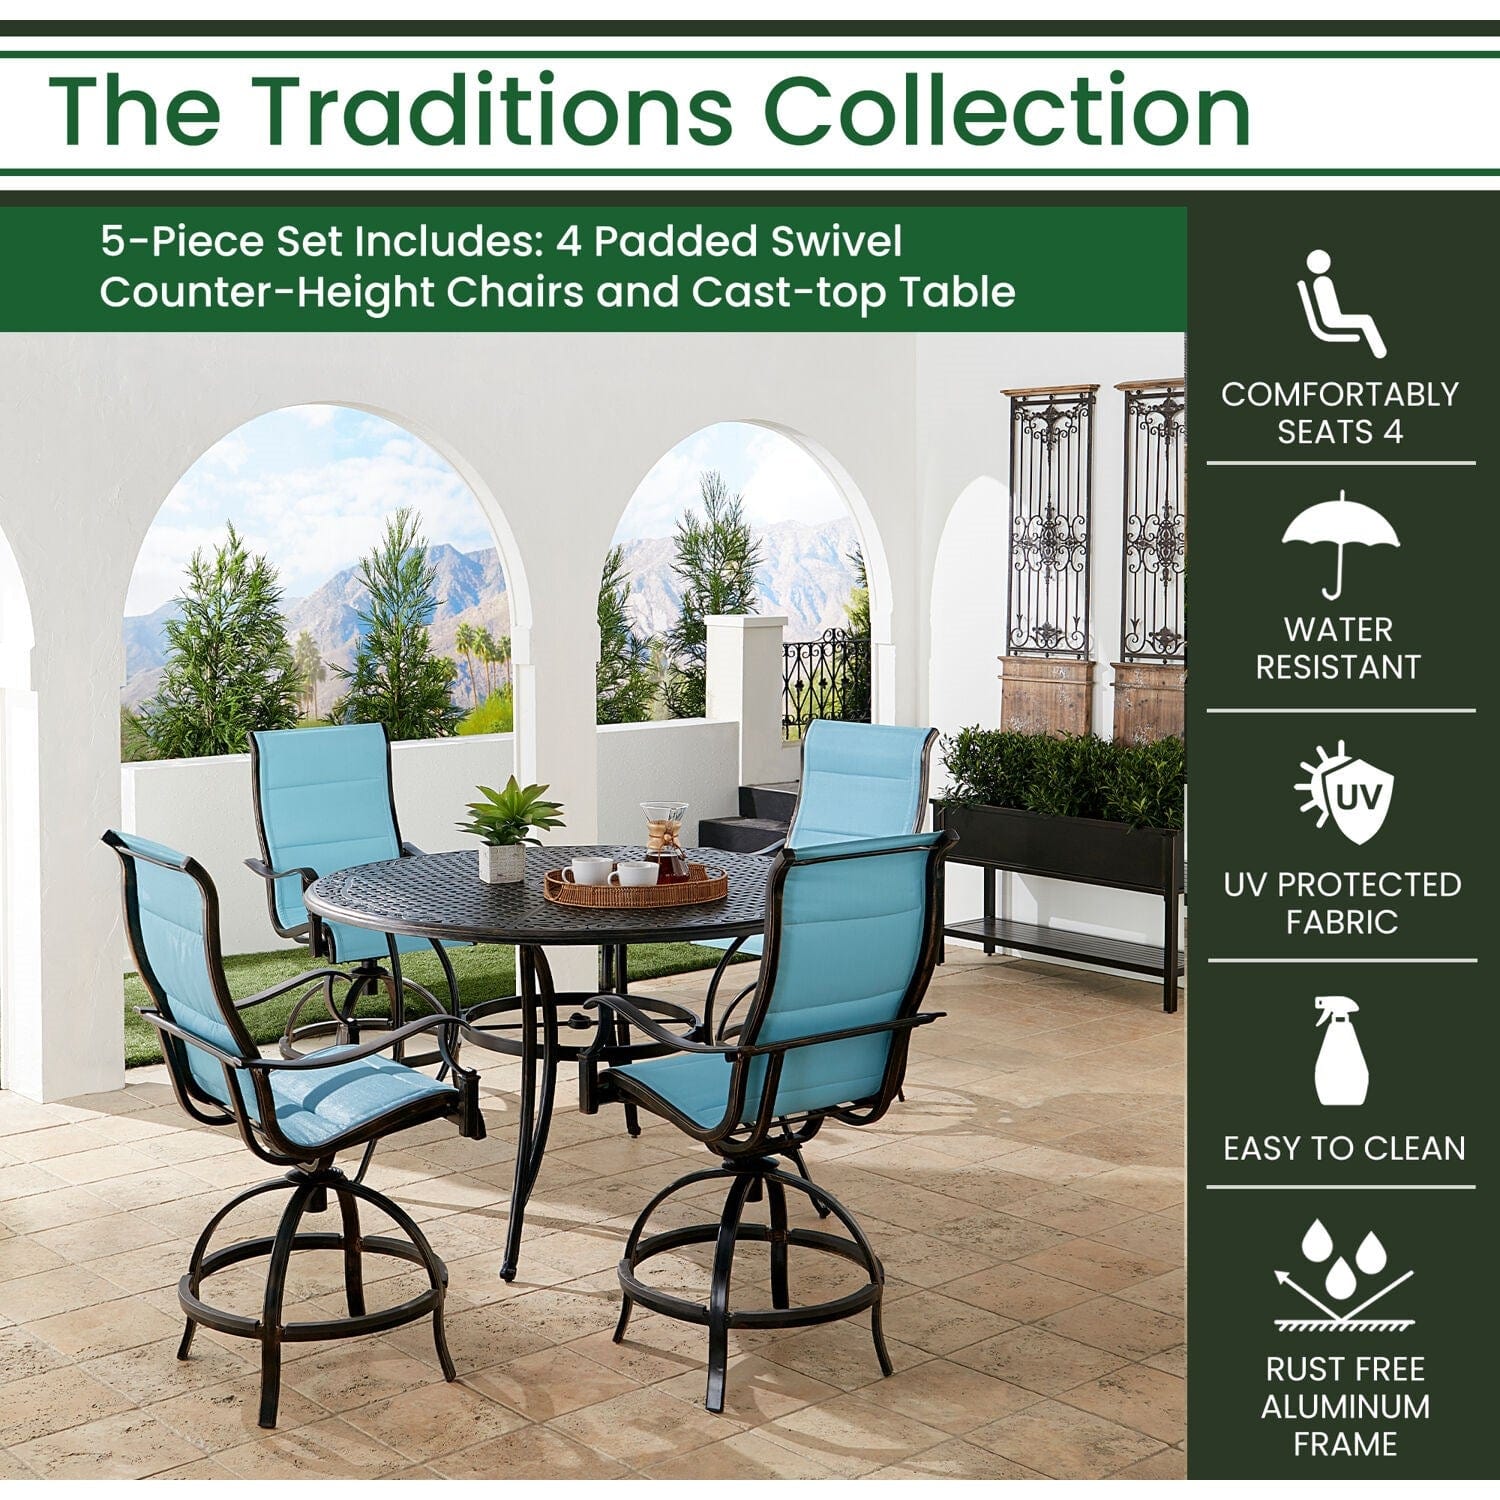 Hanover Outdoor Dining Set Hanover Traditions 5-Piece High-Dining Set in Blue with 4 Padded Swivel Counter-Height Chairs and 56-in. Cast-top Table